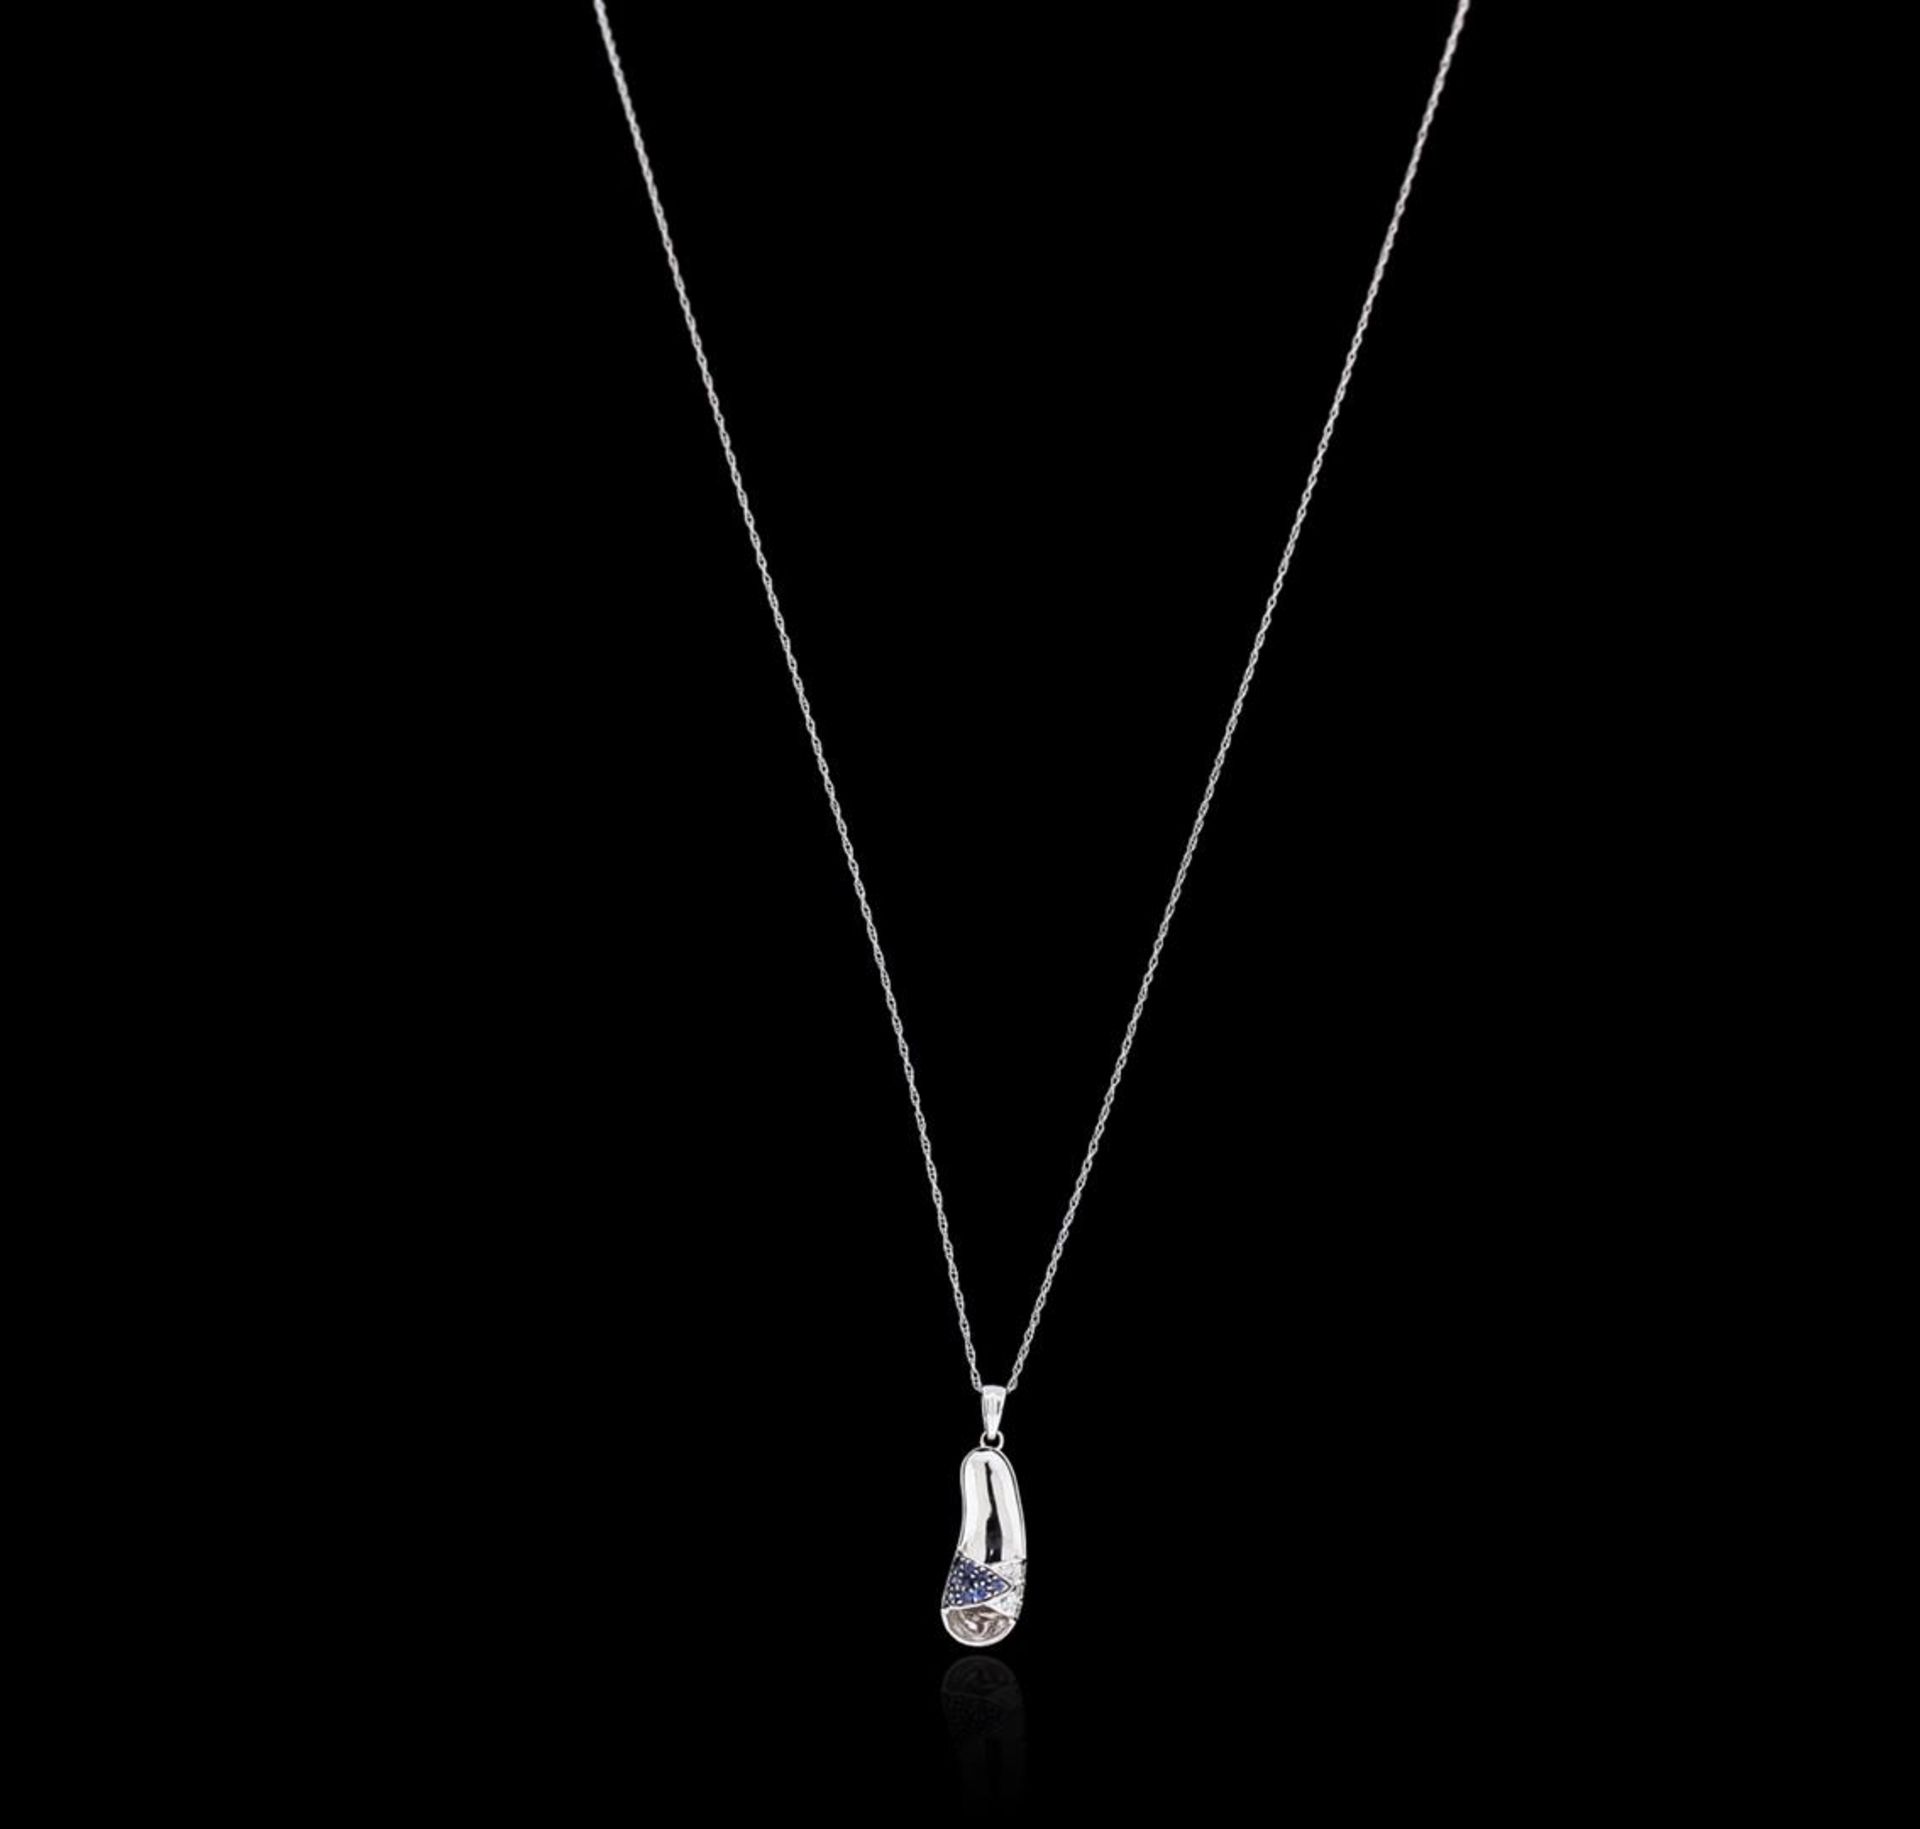 14KT White Gold 0.10 ctw Sapphire and Diamond Pendant With Chain - Image 2 of 2